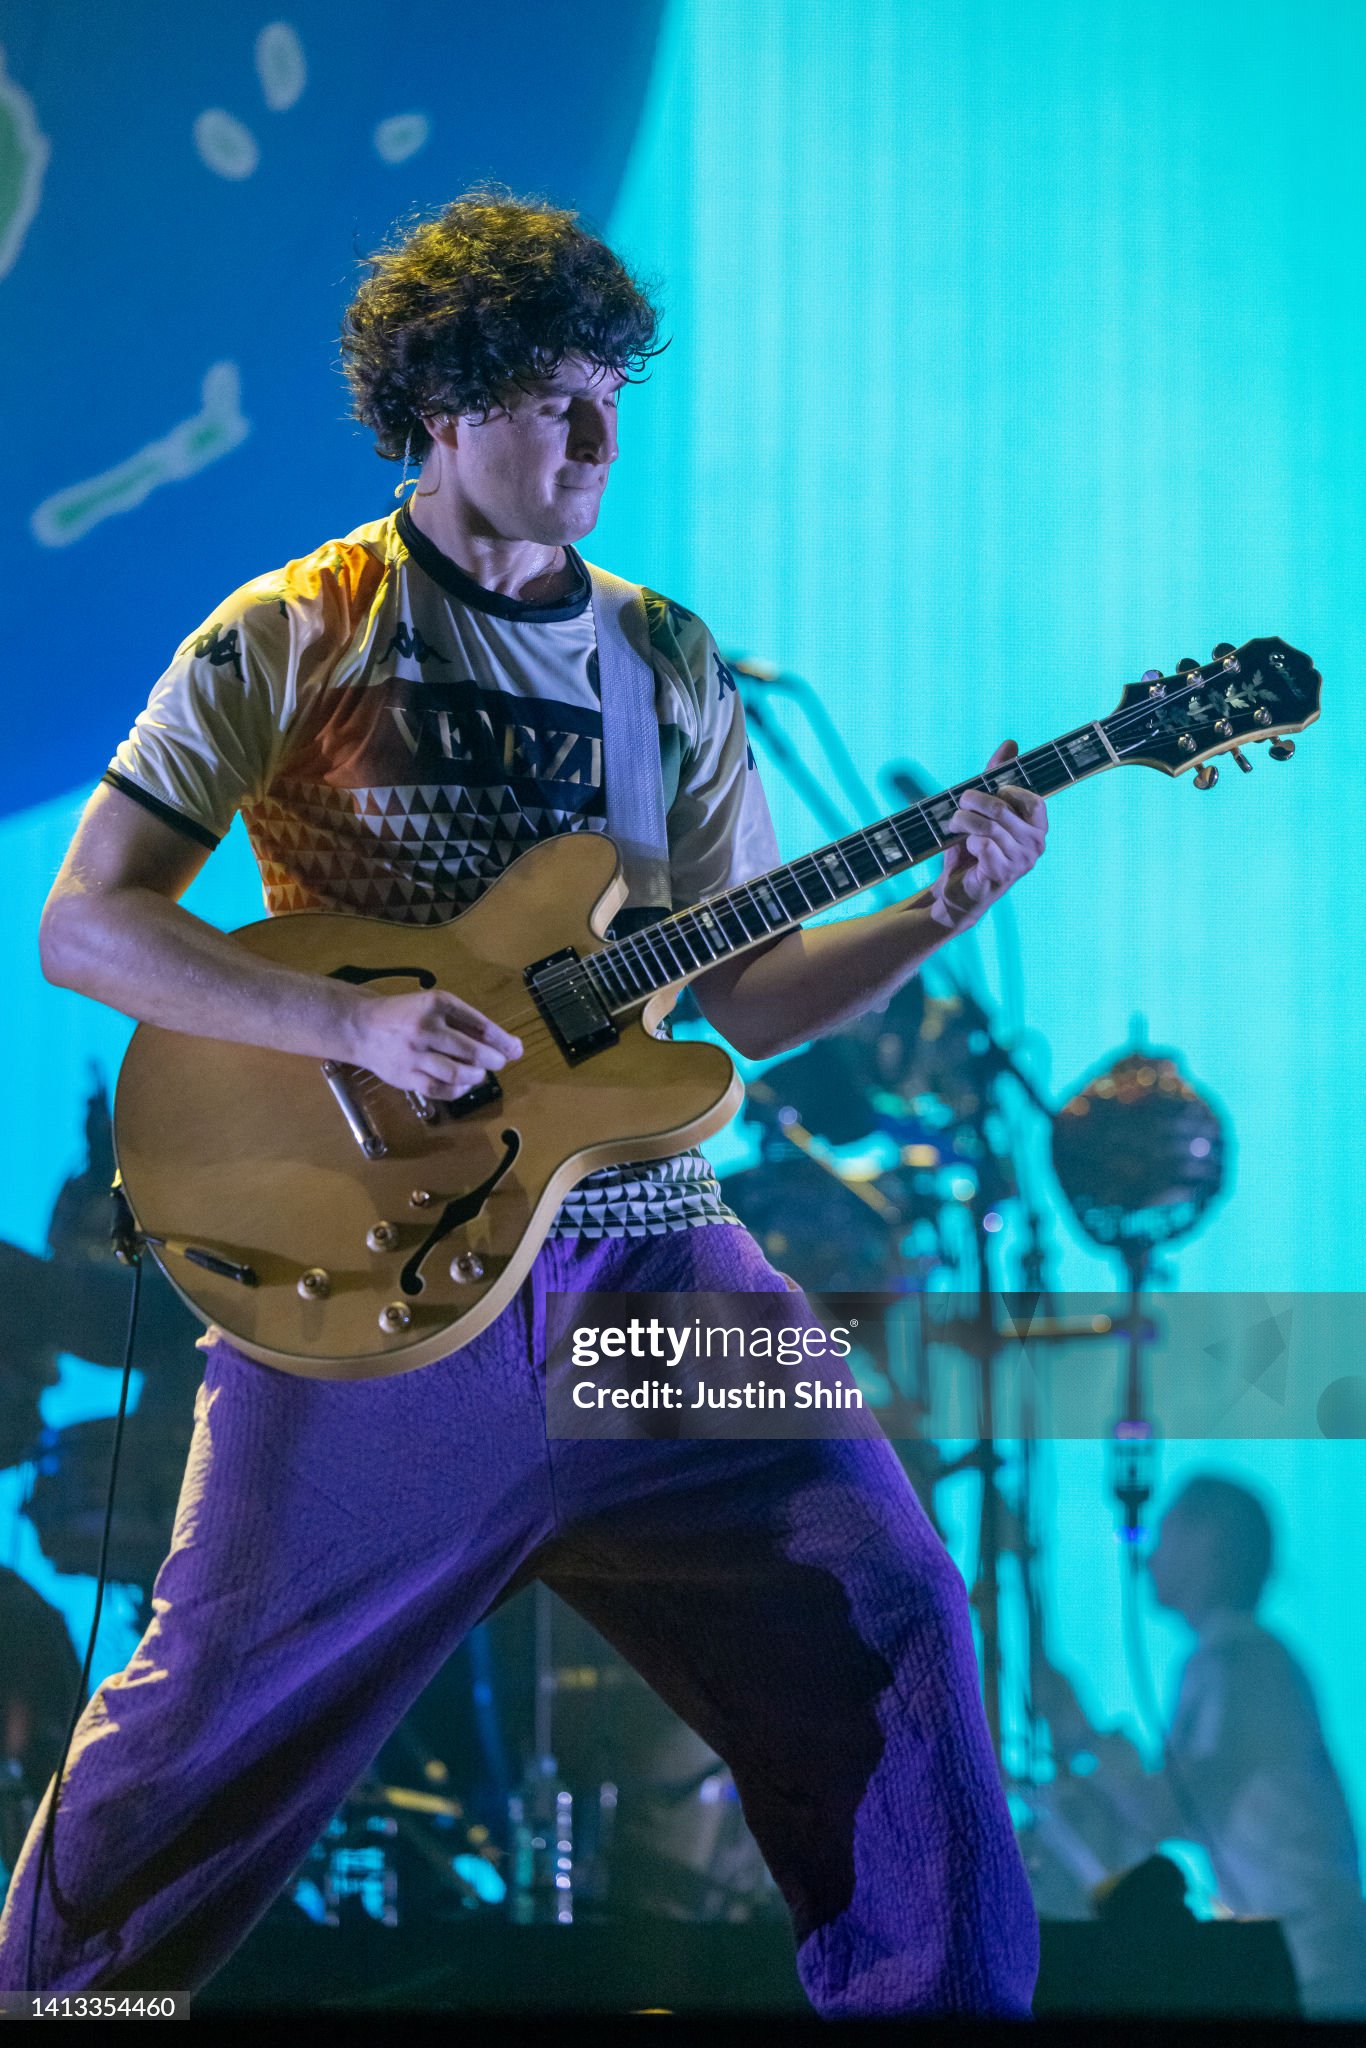 gettyimages-1413354460-2048x2048.jpg